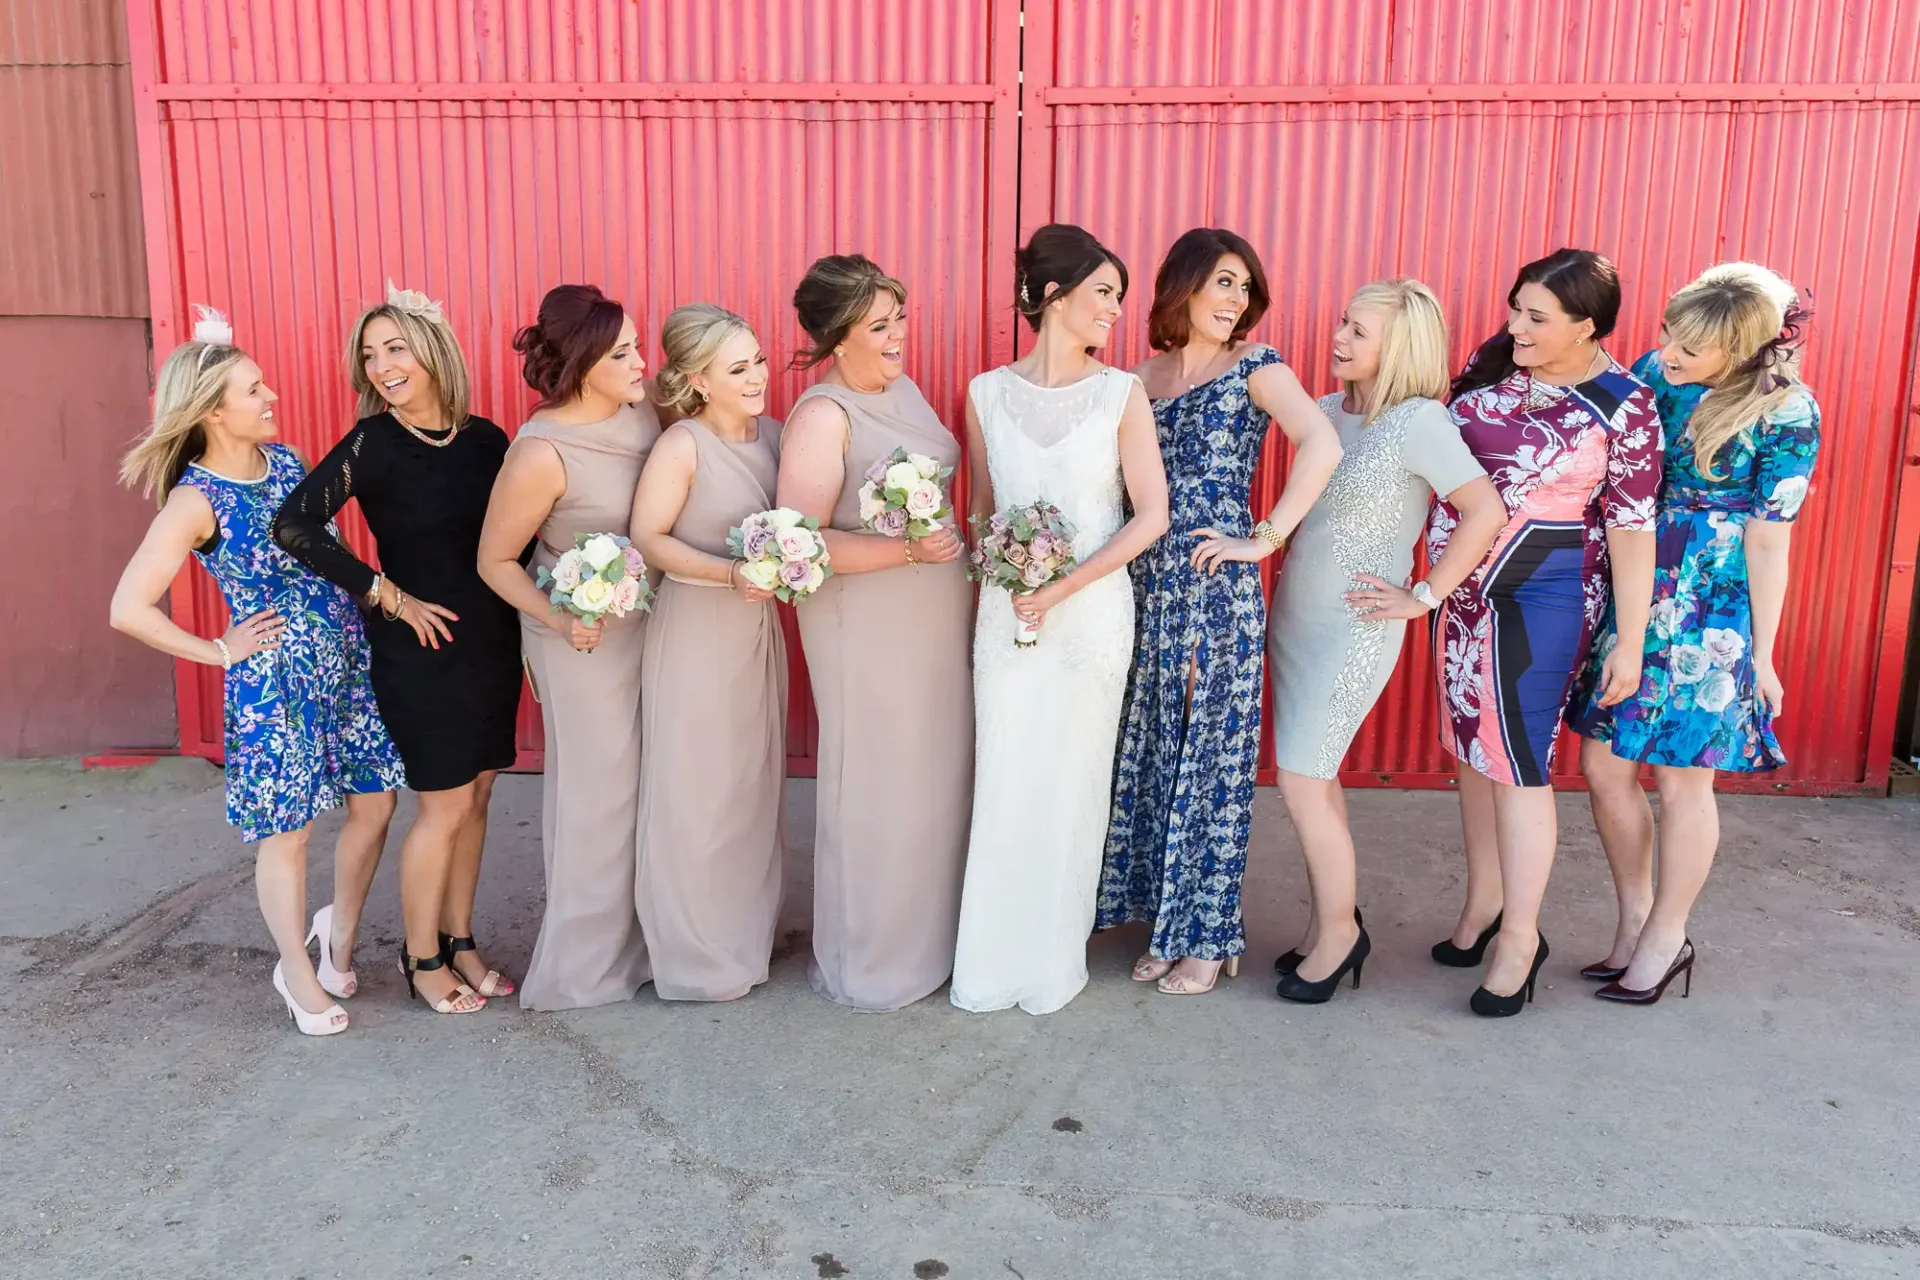 A group of women in elegant dresses posing with a bride against a red corrugated metal background.